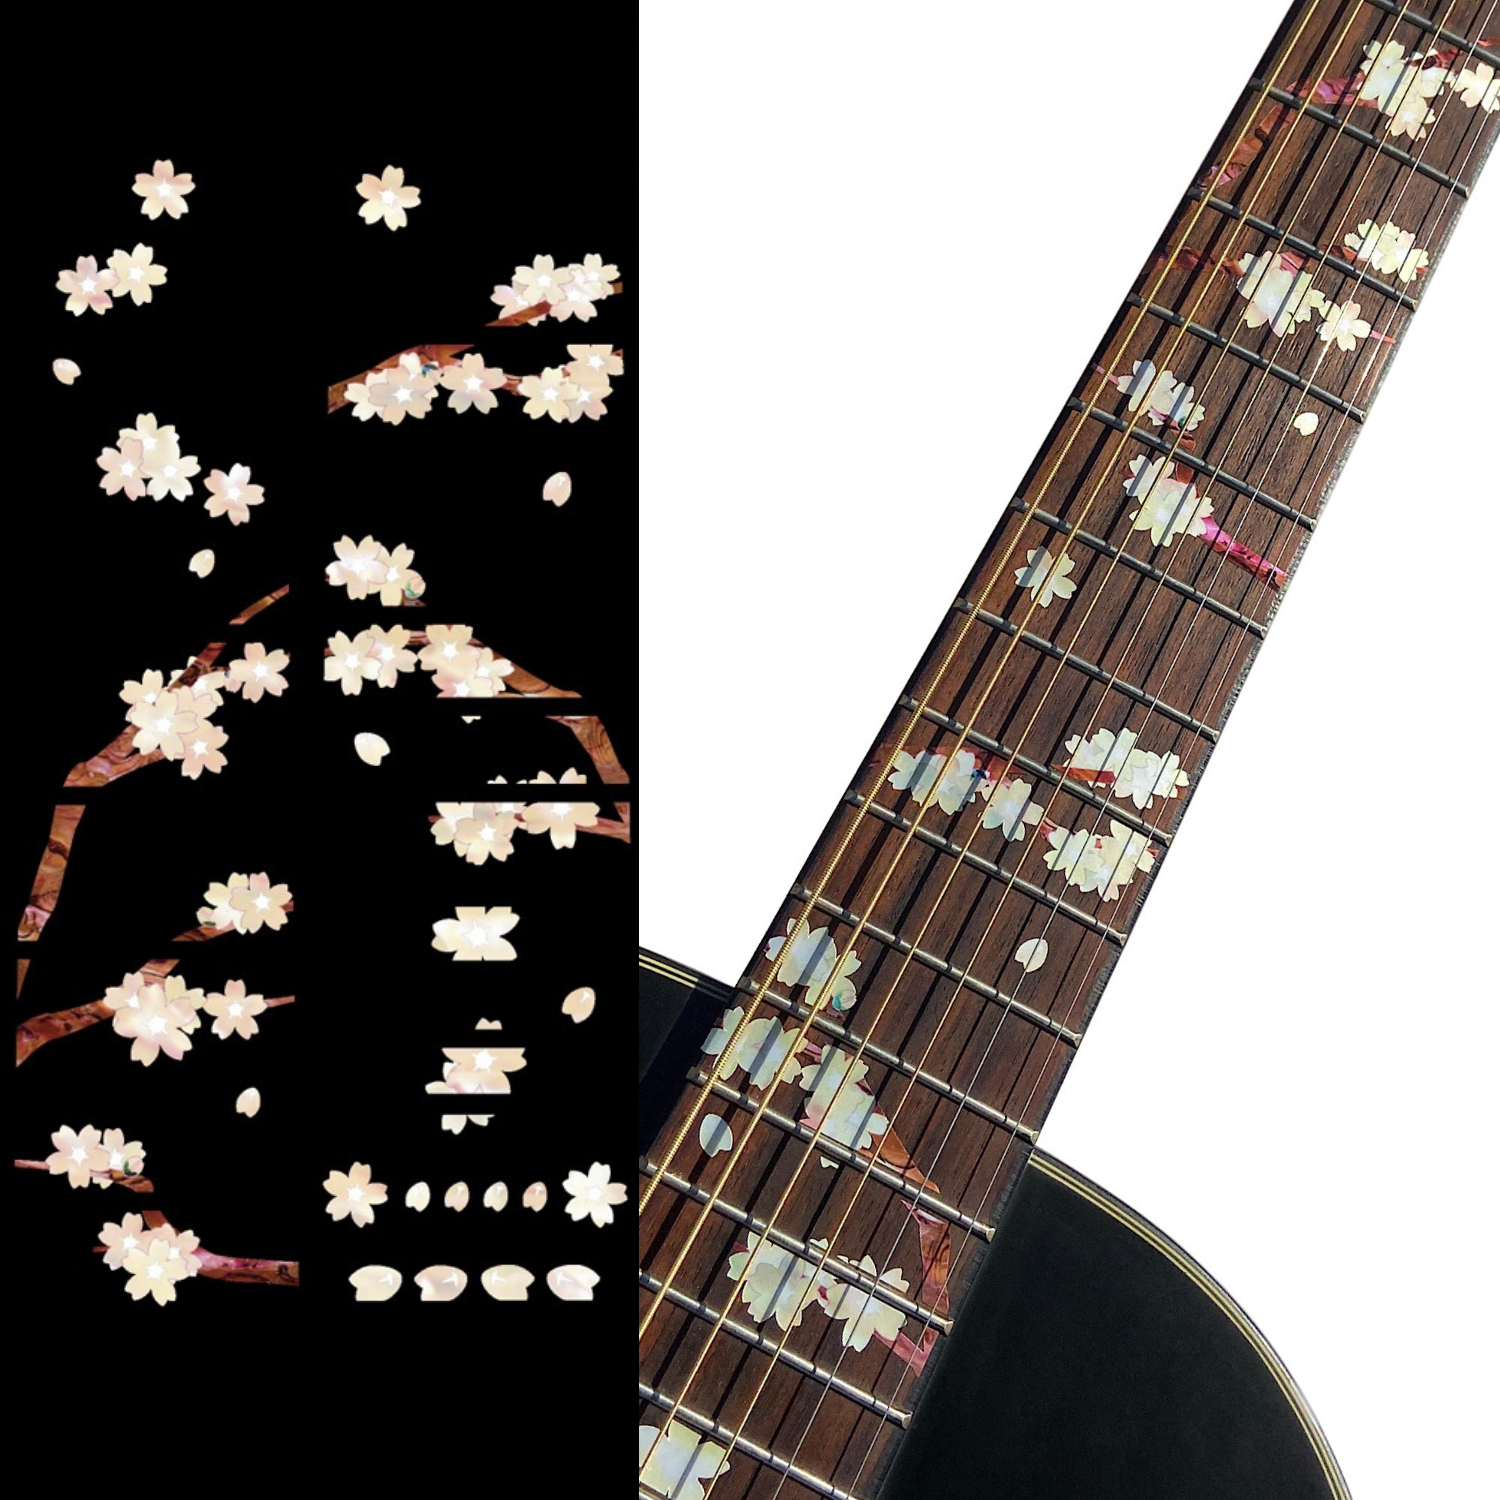 Real Fire Flame-Burning Inlay Stickers Decals Guitar Bass – Inlay Stickers  Jockomo